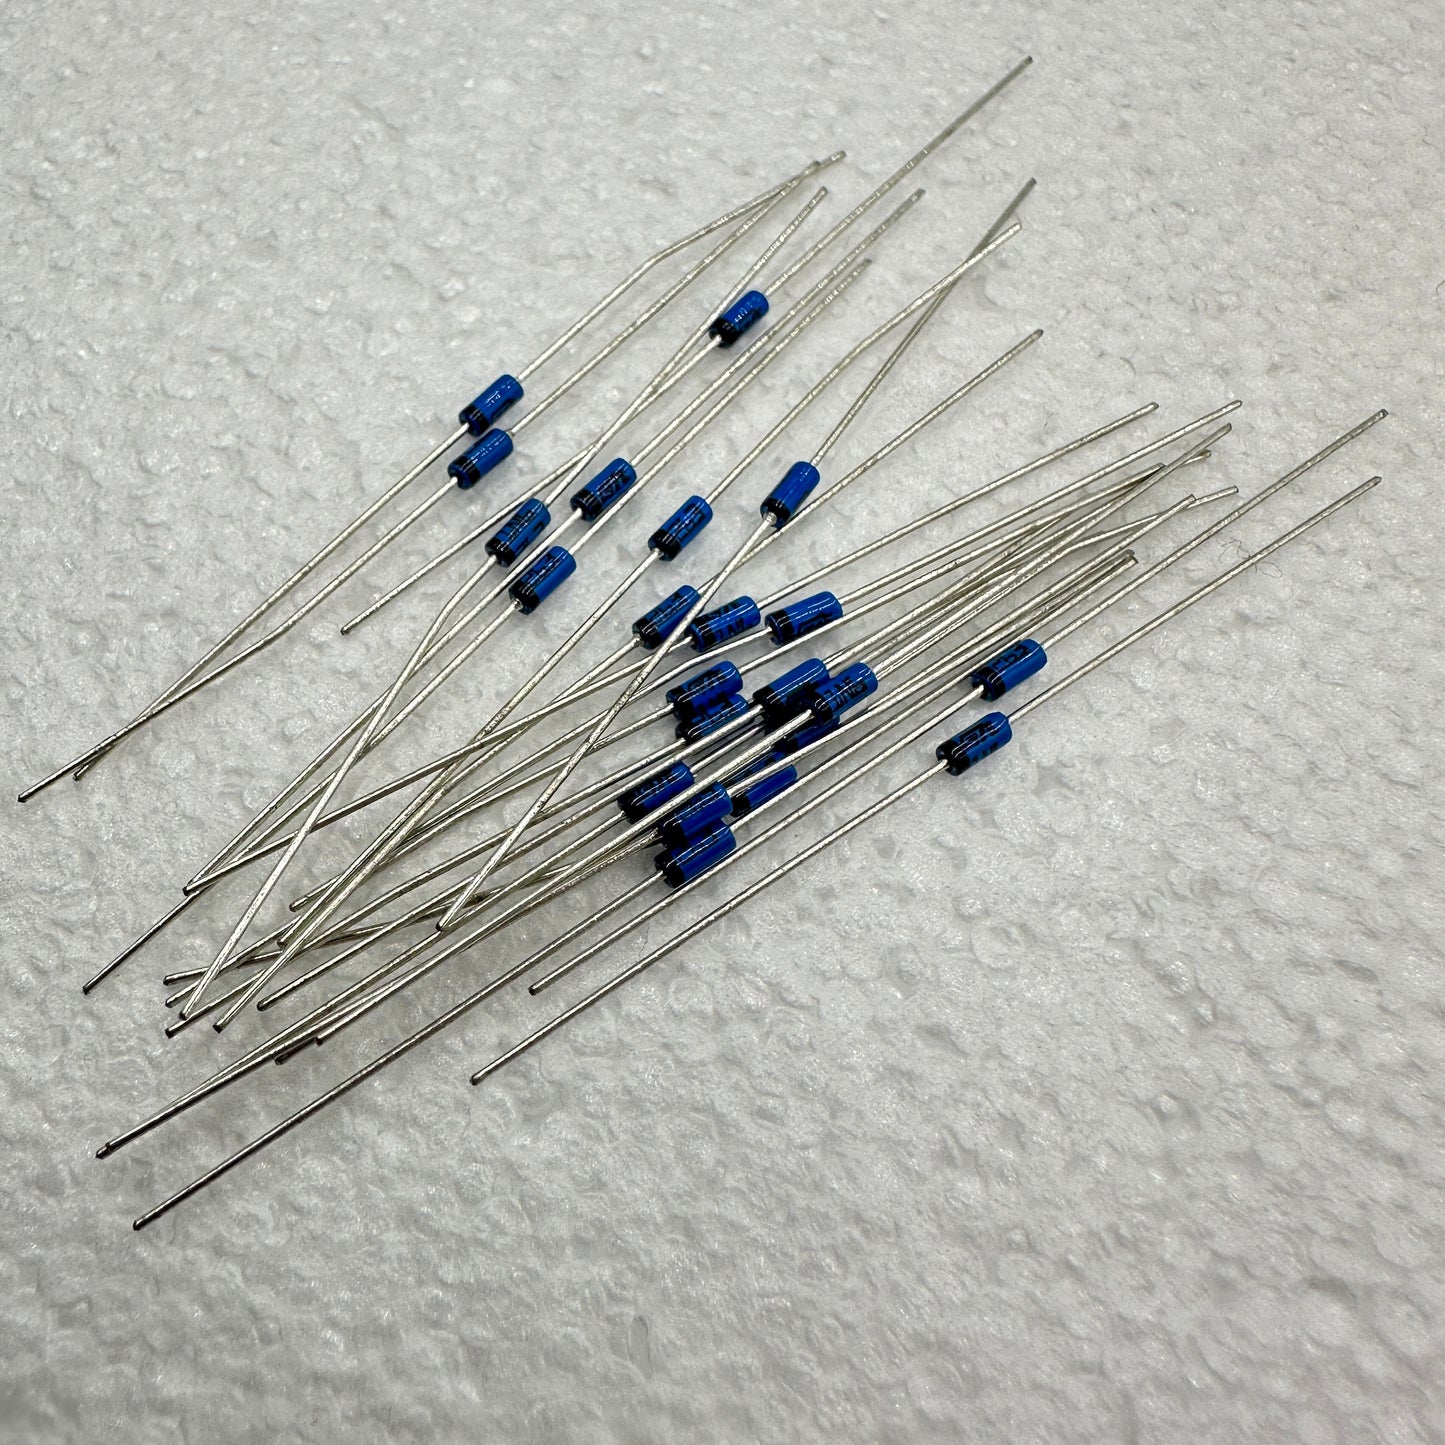 10 PACK 1N6263 Silicon Schottky Barrier Diode ST Original Clipping